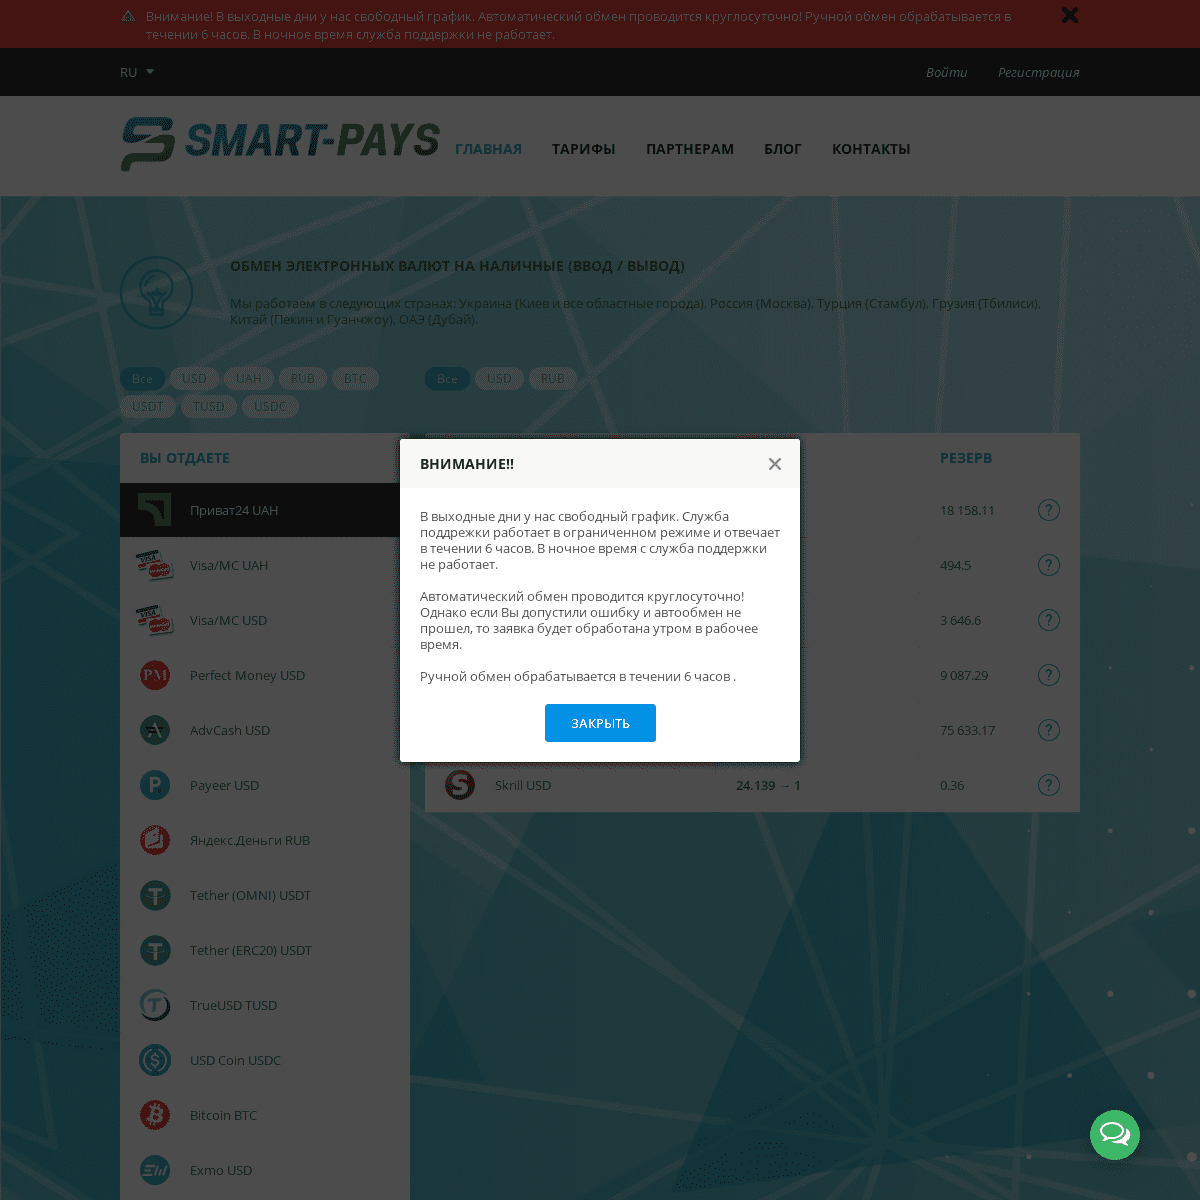 A complete backup of smart-pays.com